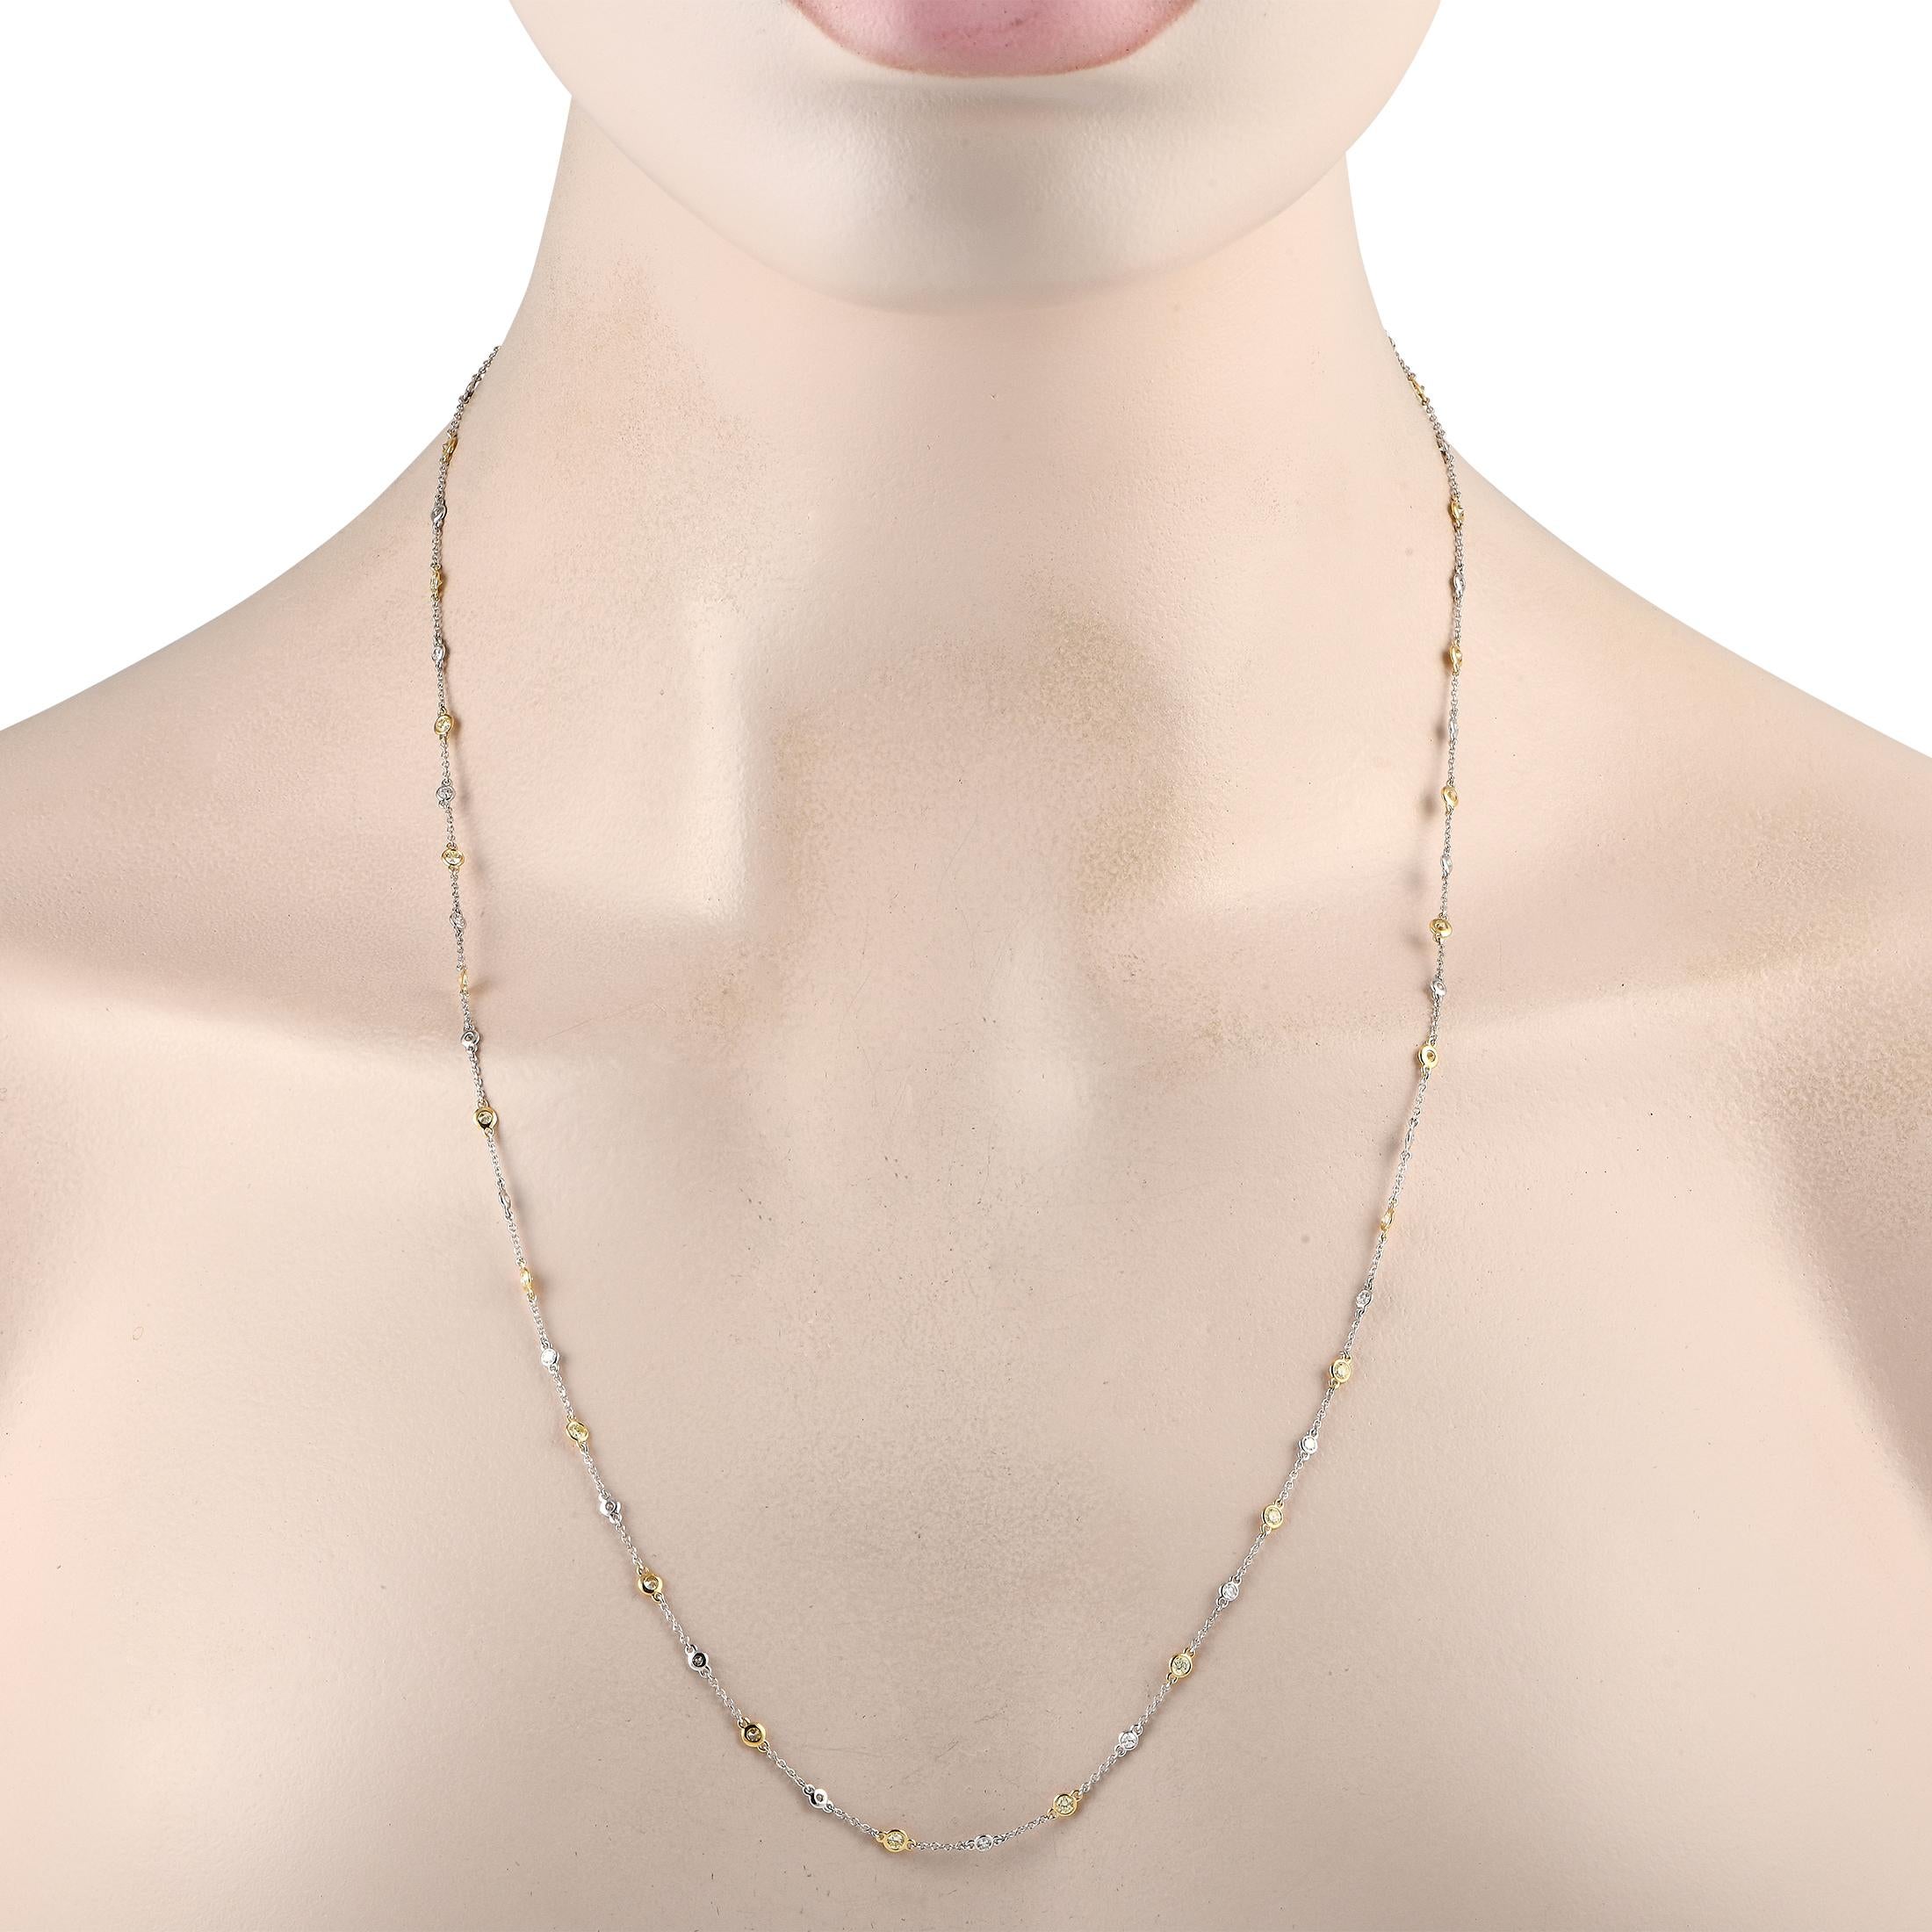 Take any outfit to the next level with this sophisticated luxury necklace. On this pieces delicate 24 chain, youll find a series of sparkling diamonds totaling 1.09 carats in an 18K yellow gold or 18K White gold setting.This jewelry piece is offered